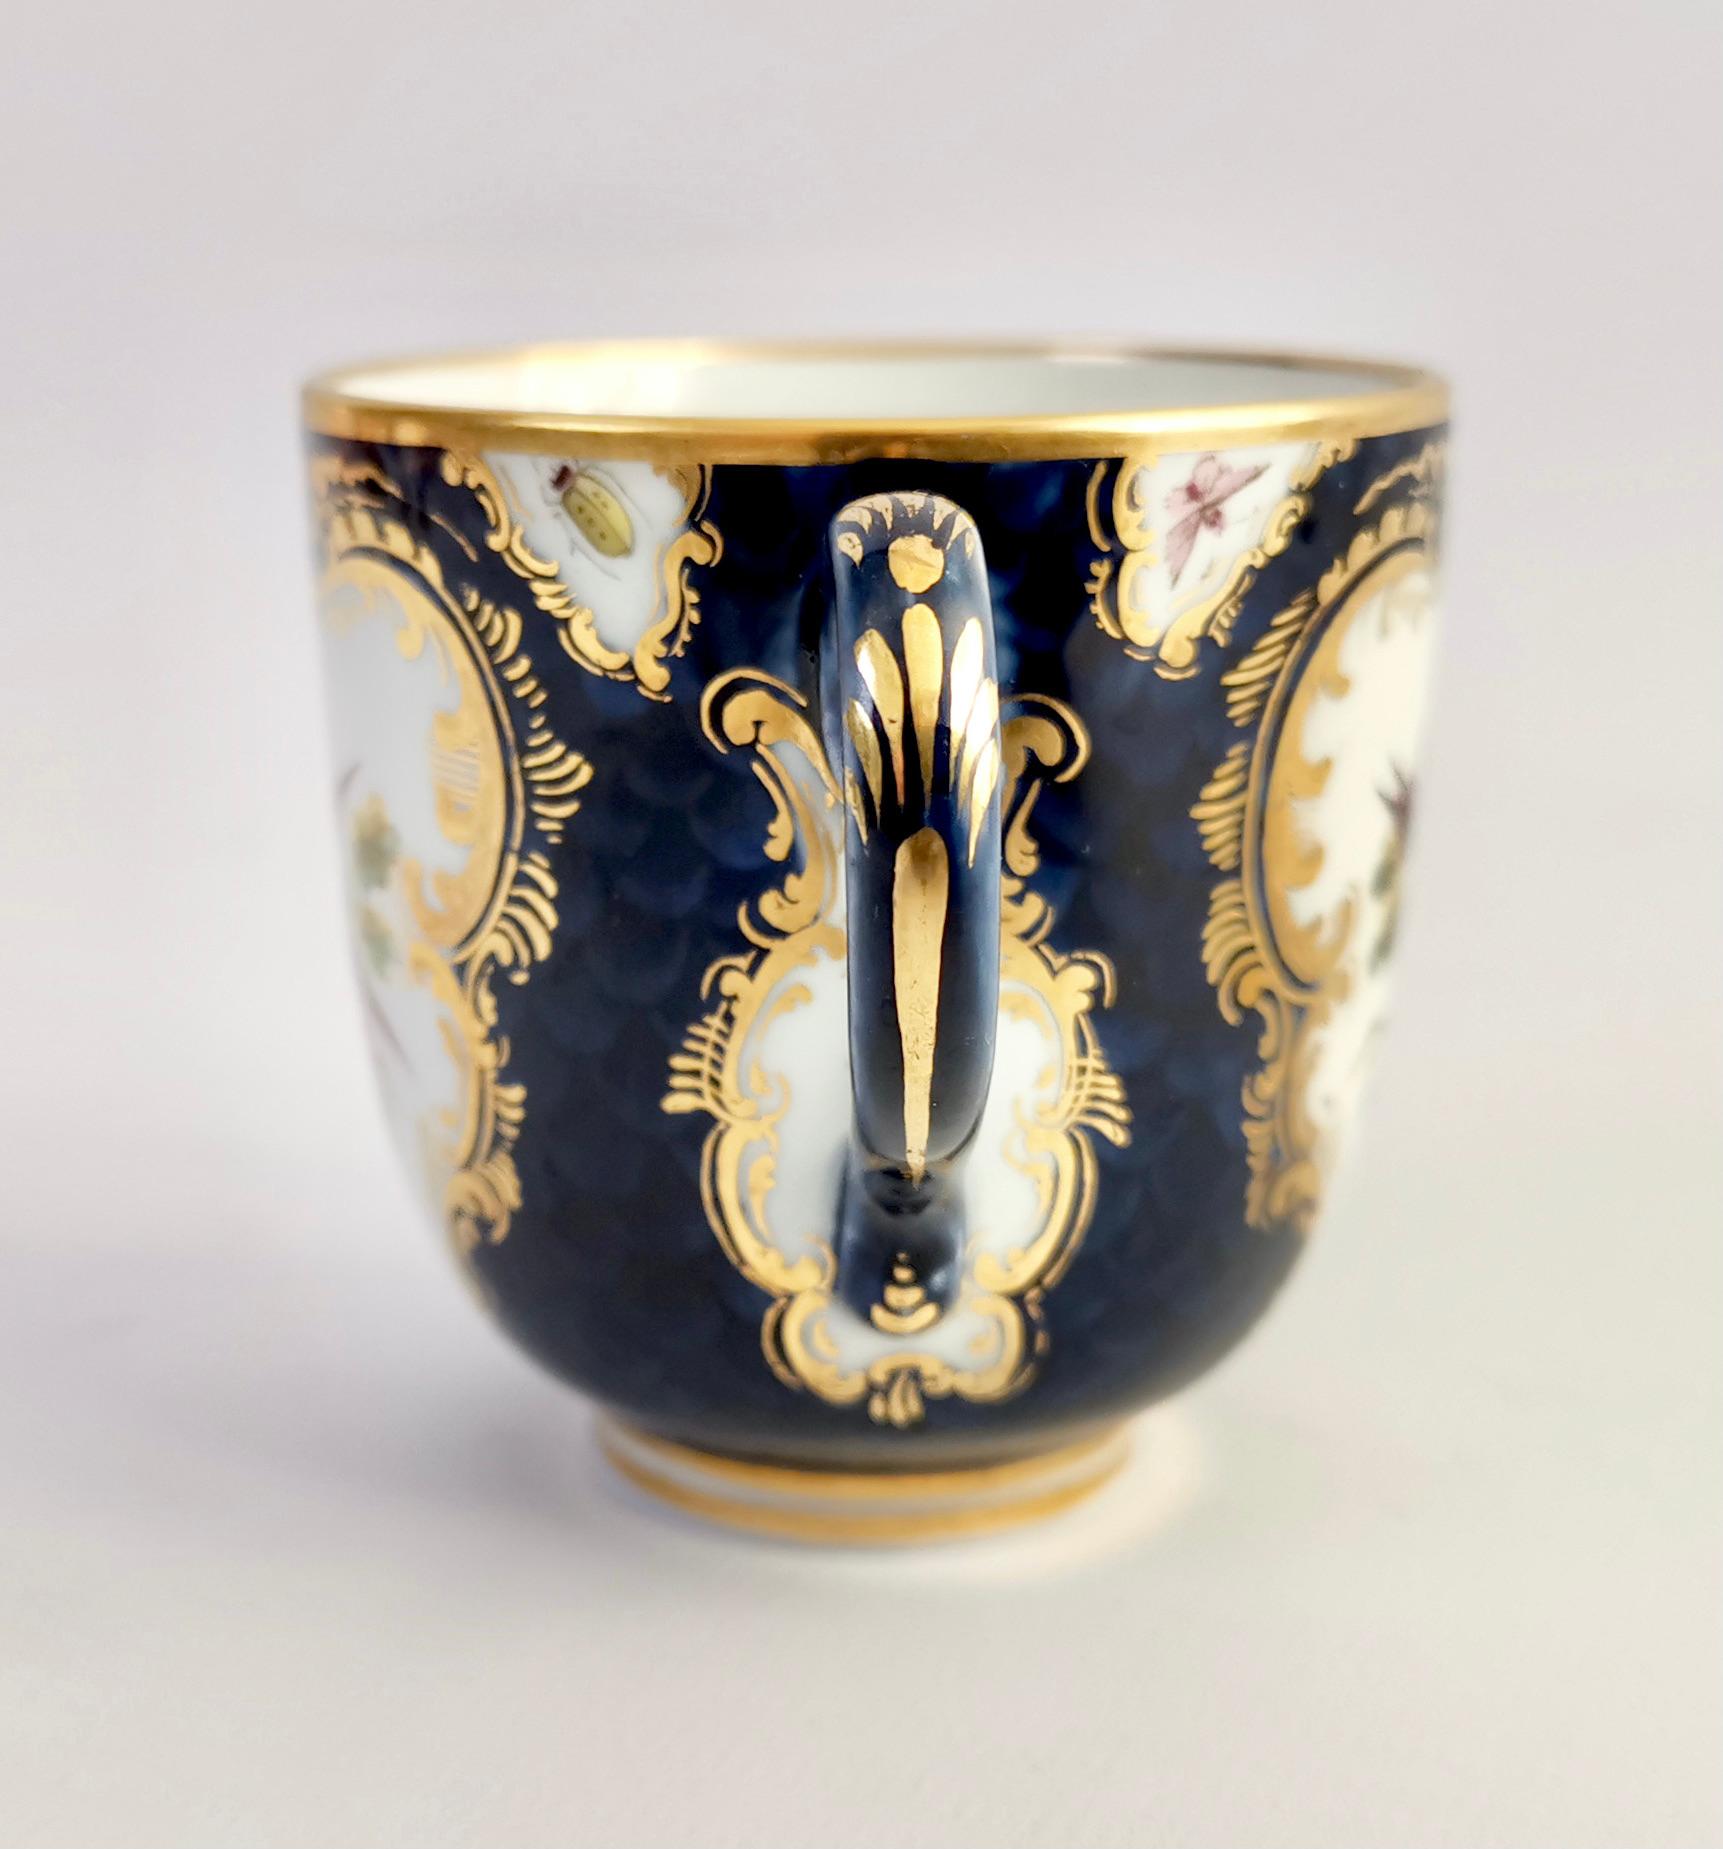 This is a beautiful orphaned coffee cup produced by Grainger & Co in Worcester in 1886, shortly before it merged with the Royal Worcester factory. The cup is decorated in a blue scale ground with Sèvres style birds and bugs.

This little cup would